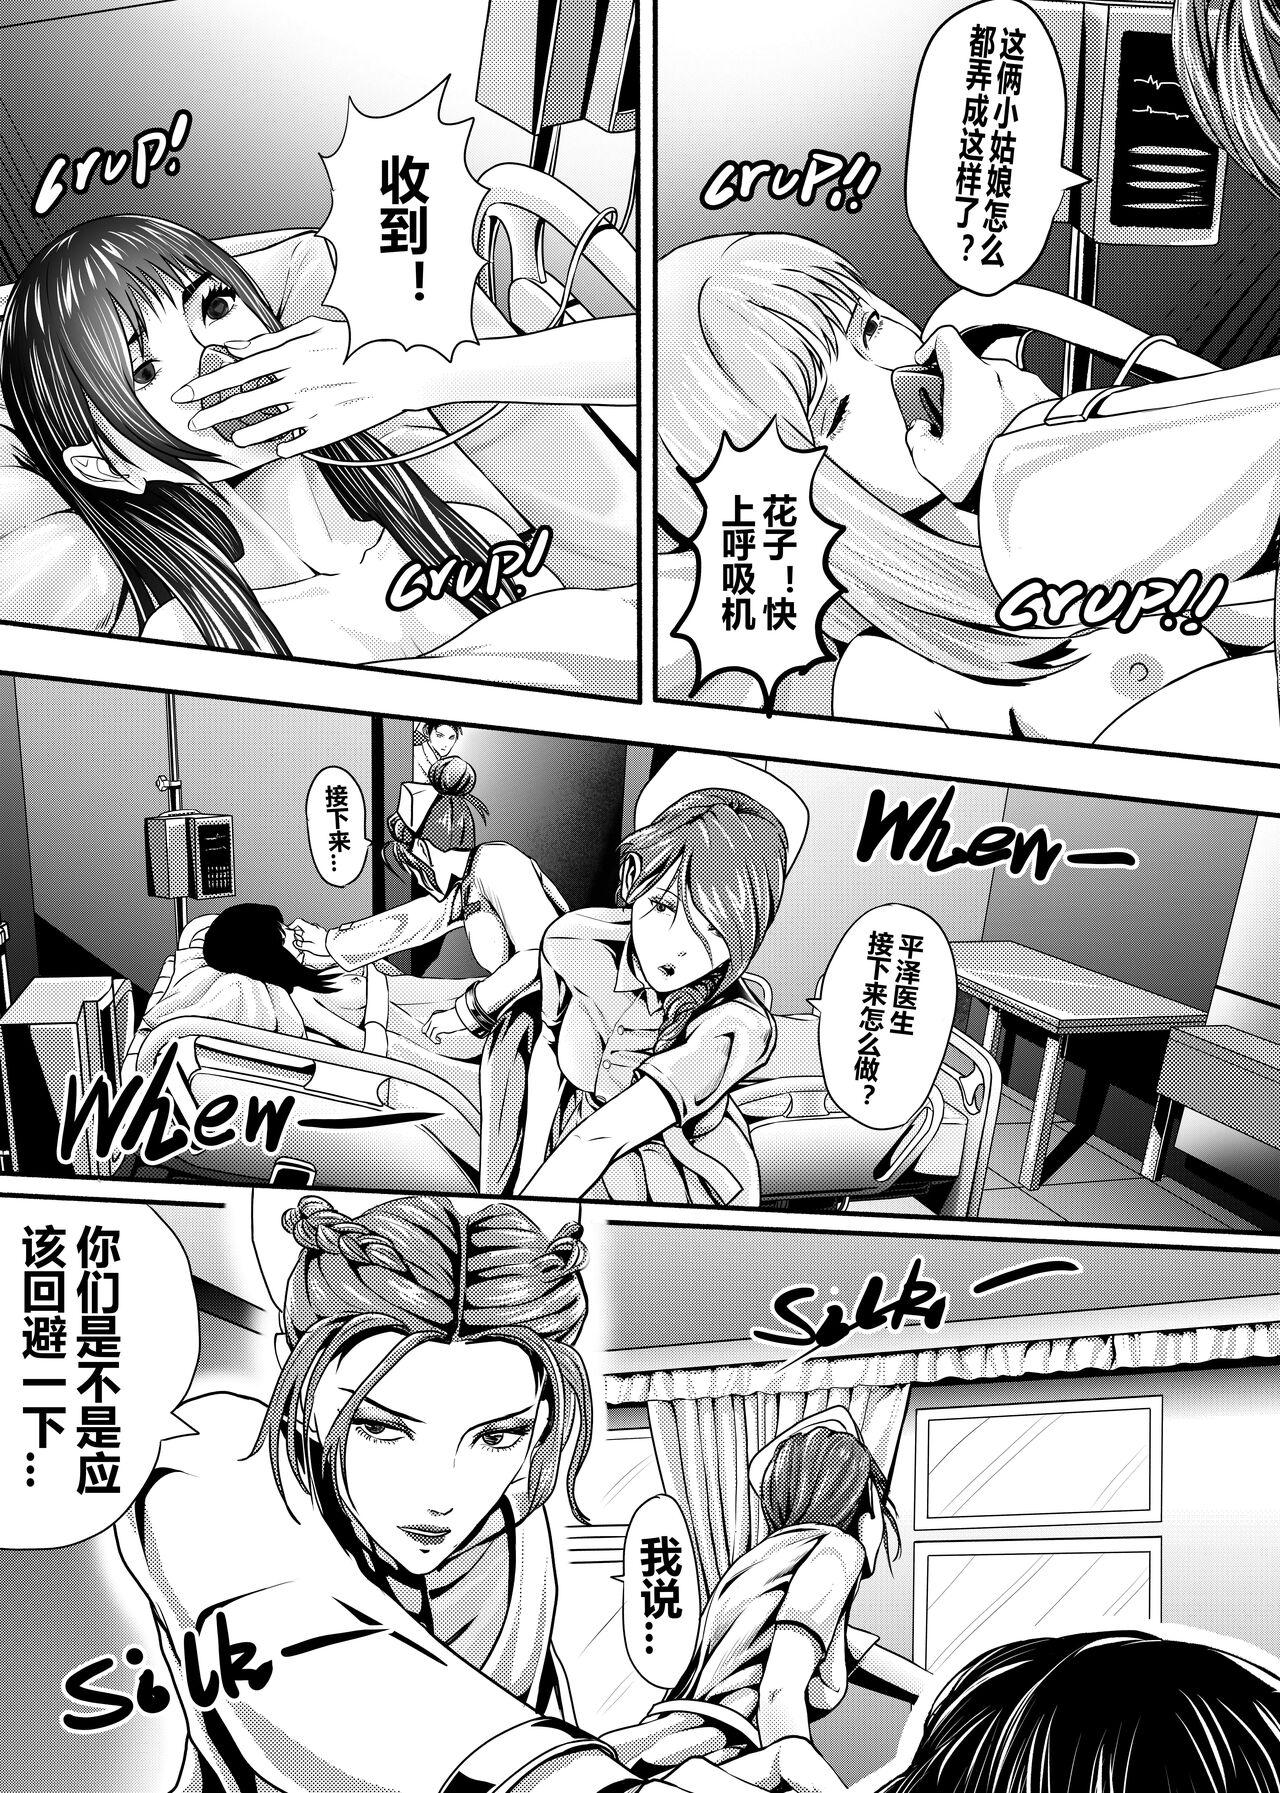 [KAO.YELLOW STUDIO (T.C.X)] I must be out of my mind to fall in love with SAORI, the Snuff Queen Ch.1-16 | 想与冰恋女王纱织同学谈恋爱的我脑子一定有问题 第1-16话 [Chinese] 182